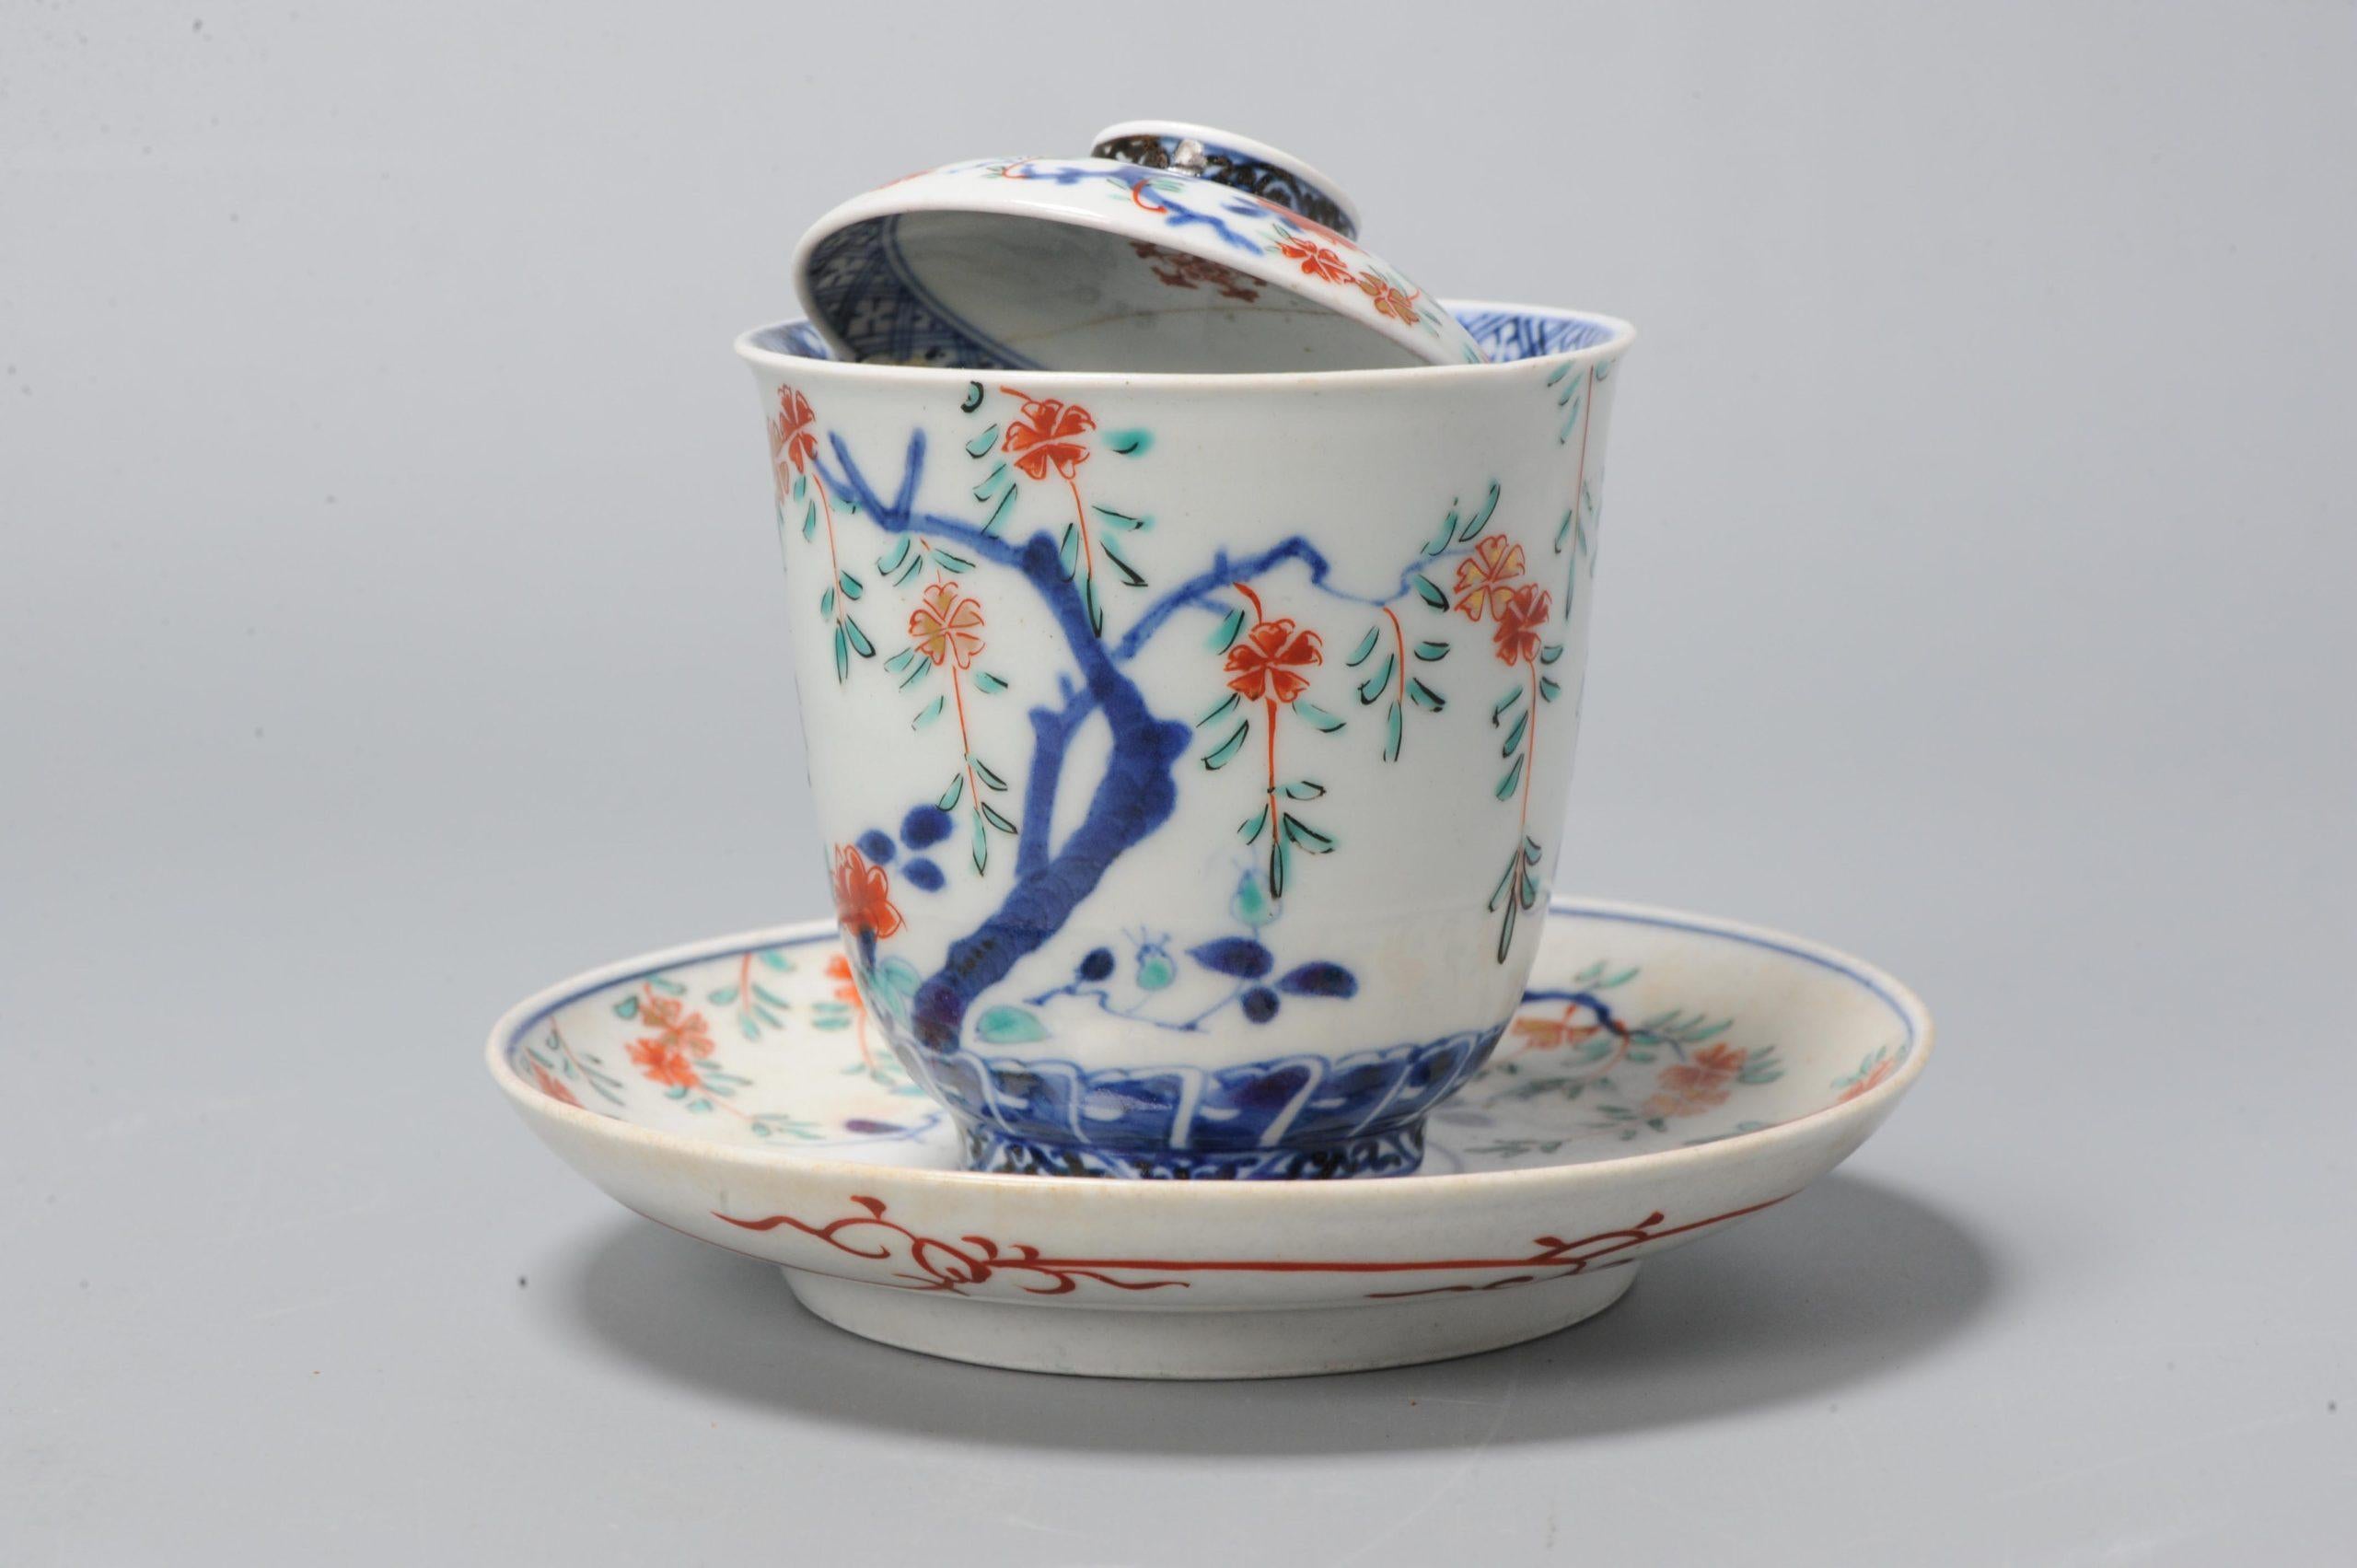 Arita Edo Period Japanese Porcelain Kakiemon Chocolate Cup/Tea Bowl In Good Condition For Sale In Amsterdam, Noord Holland